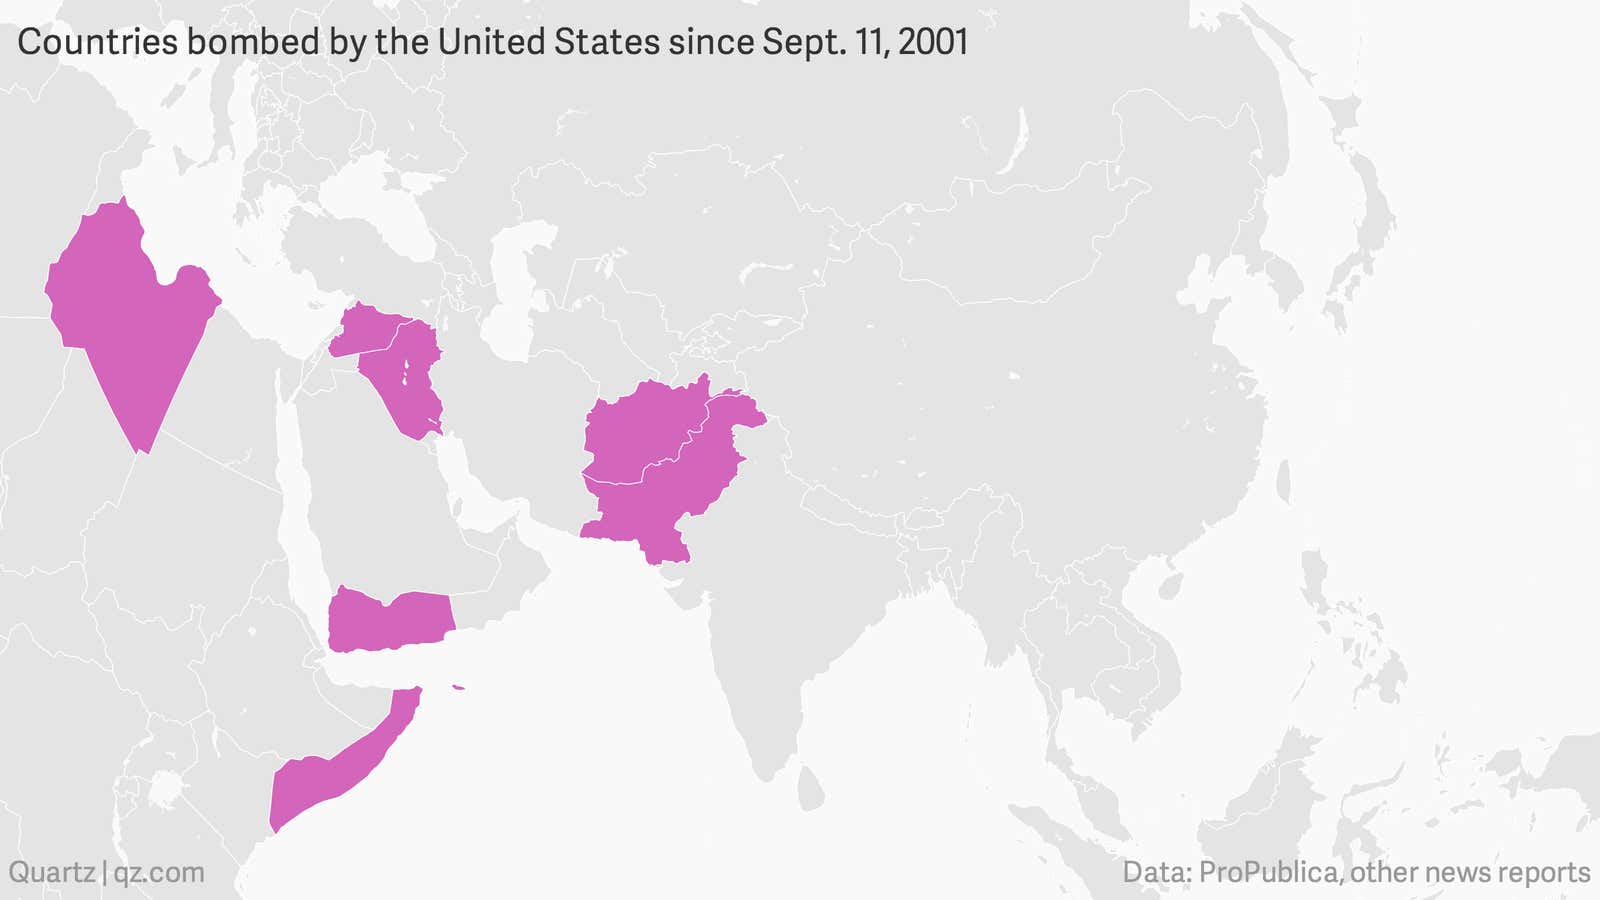 Here are the seven countries the United States has bombed since 9/11